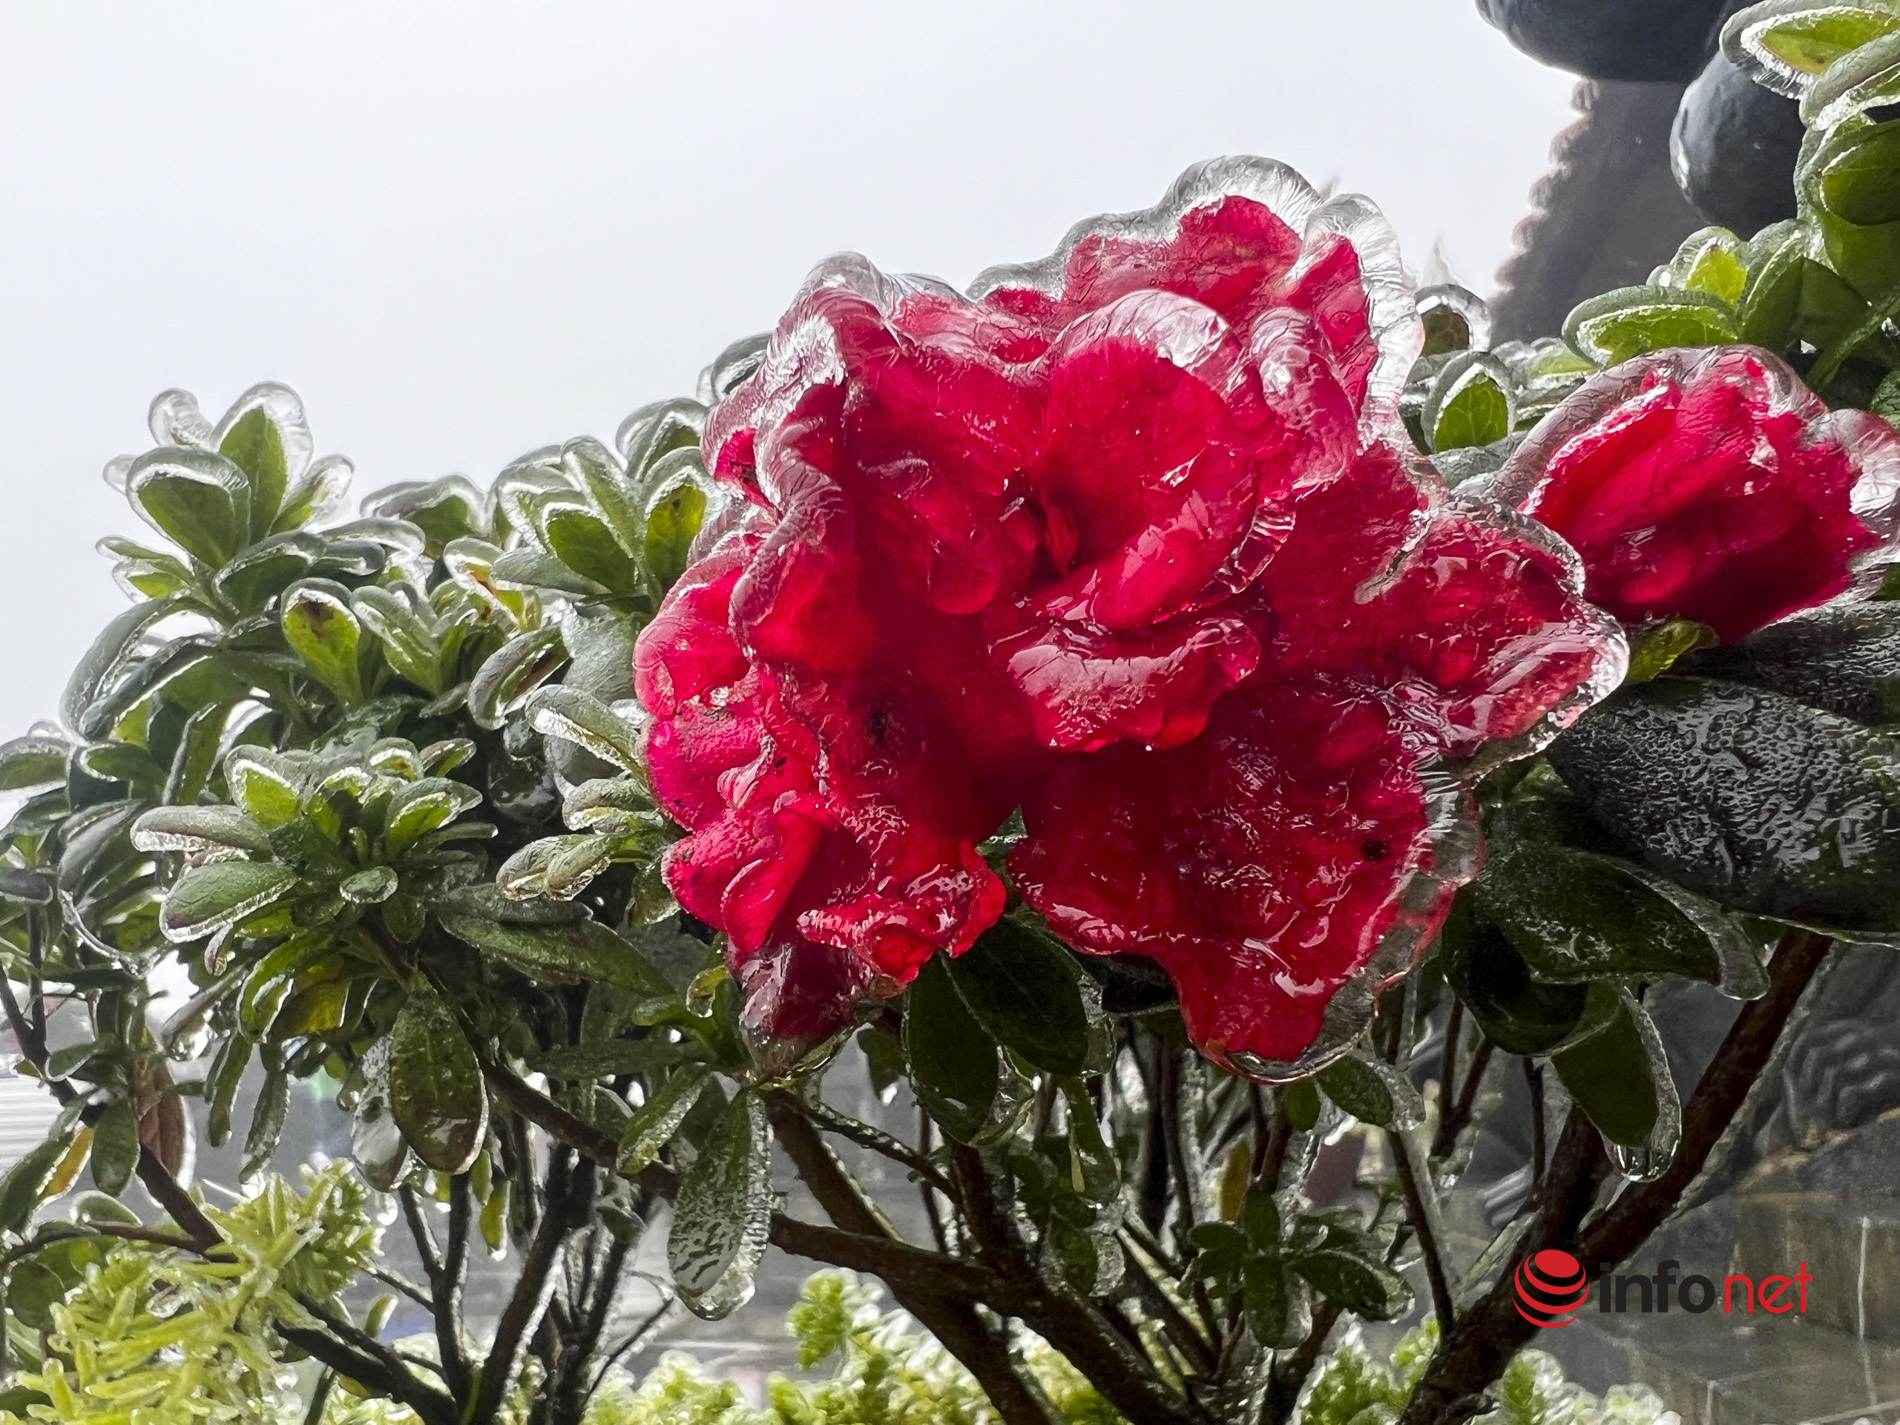 At the end of spring, ice still covers the top of Fansipan